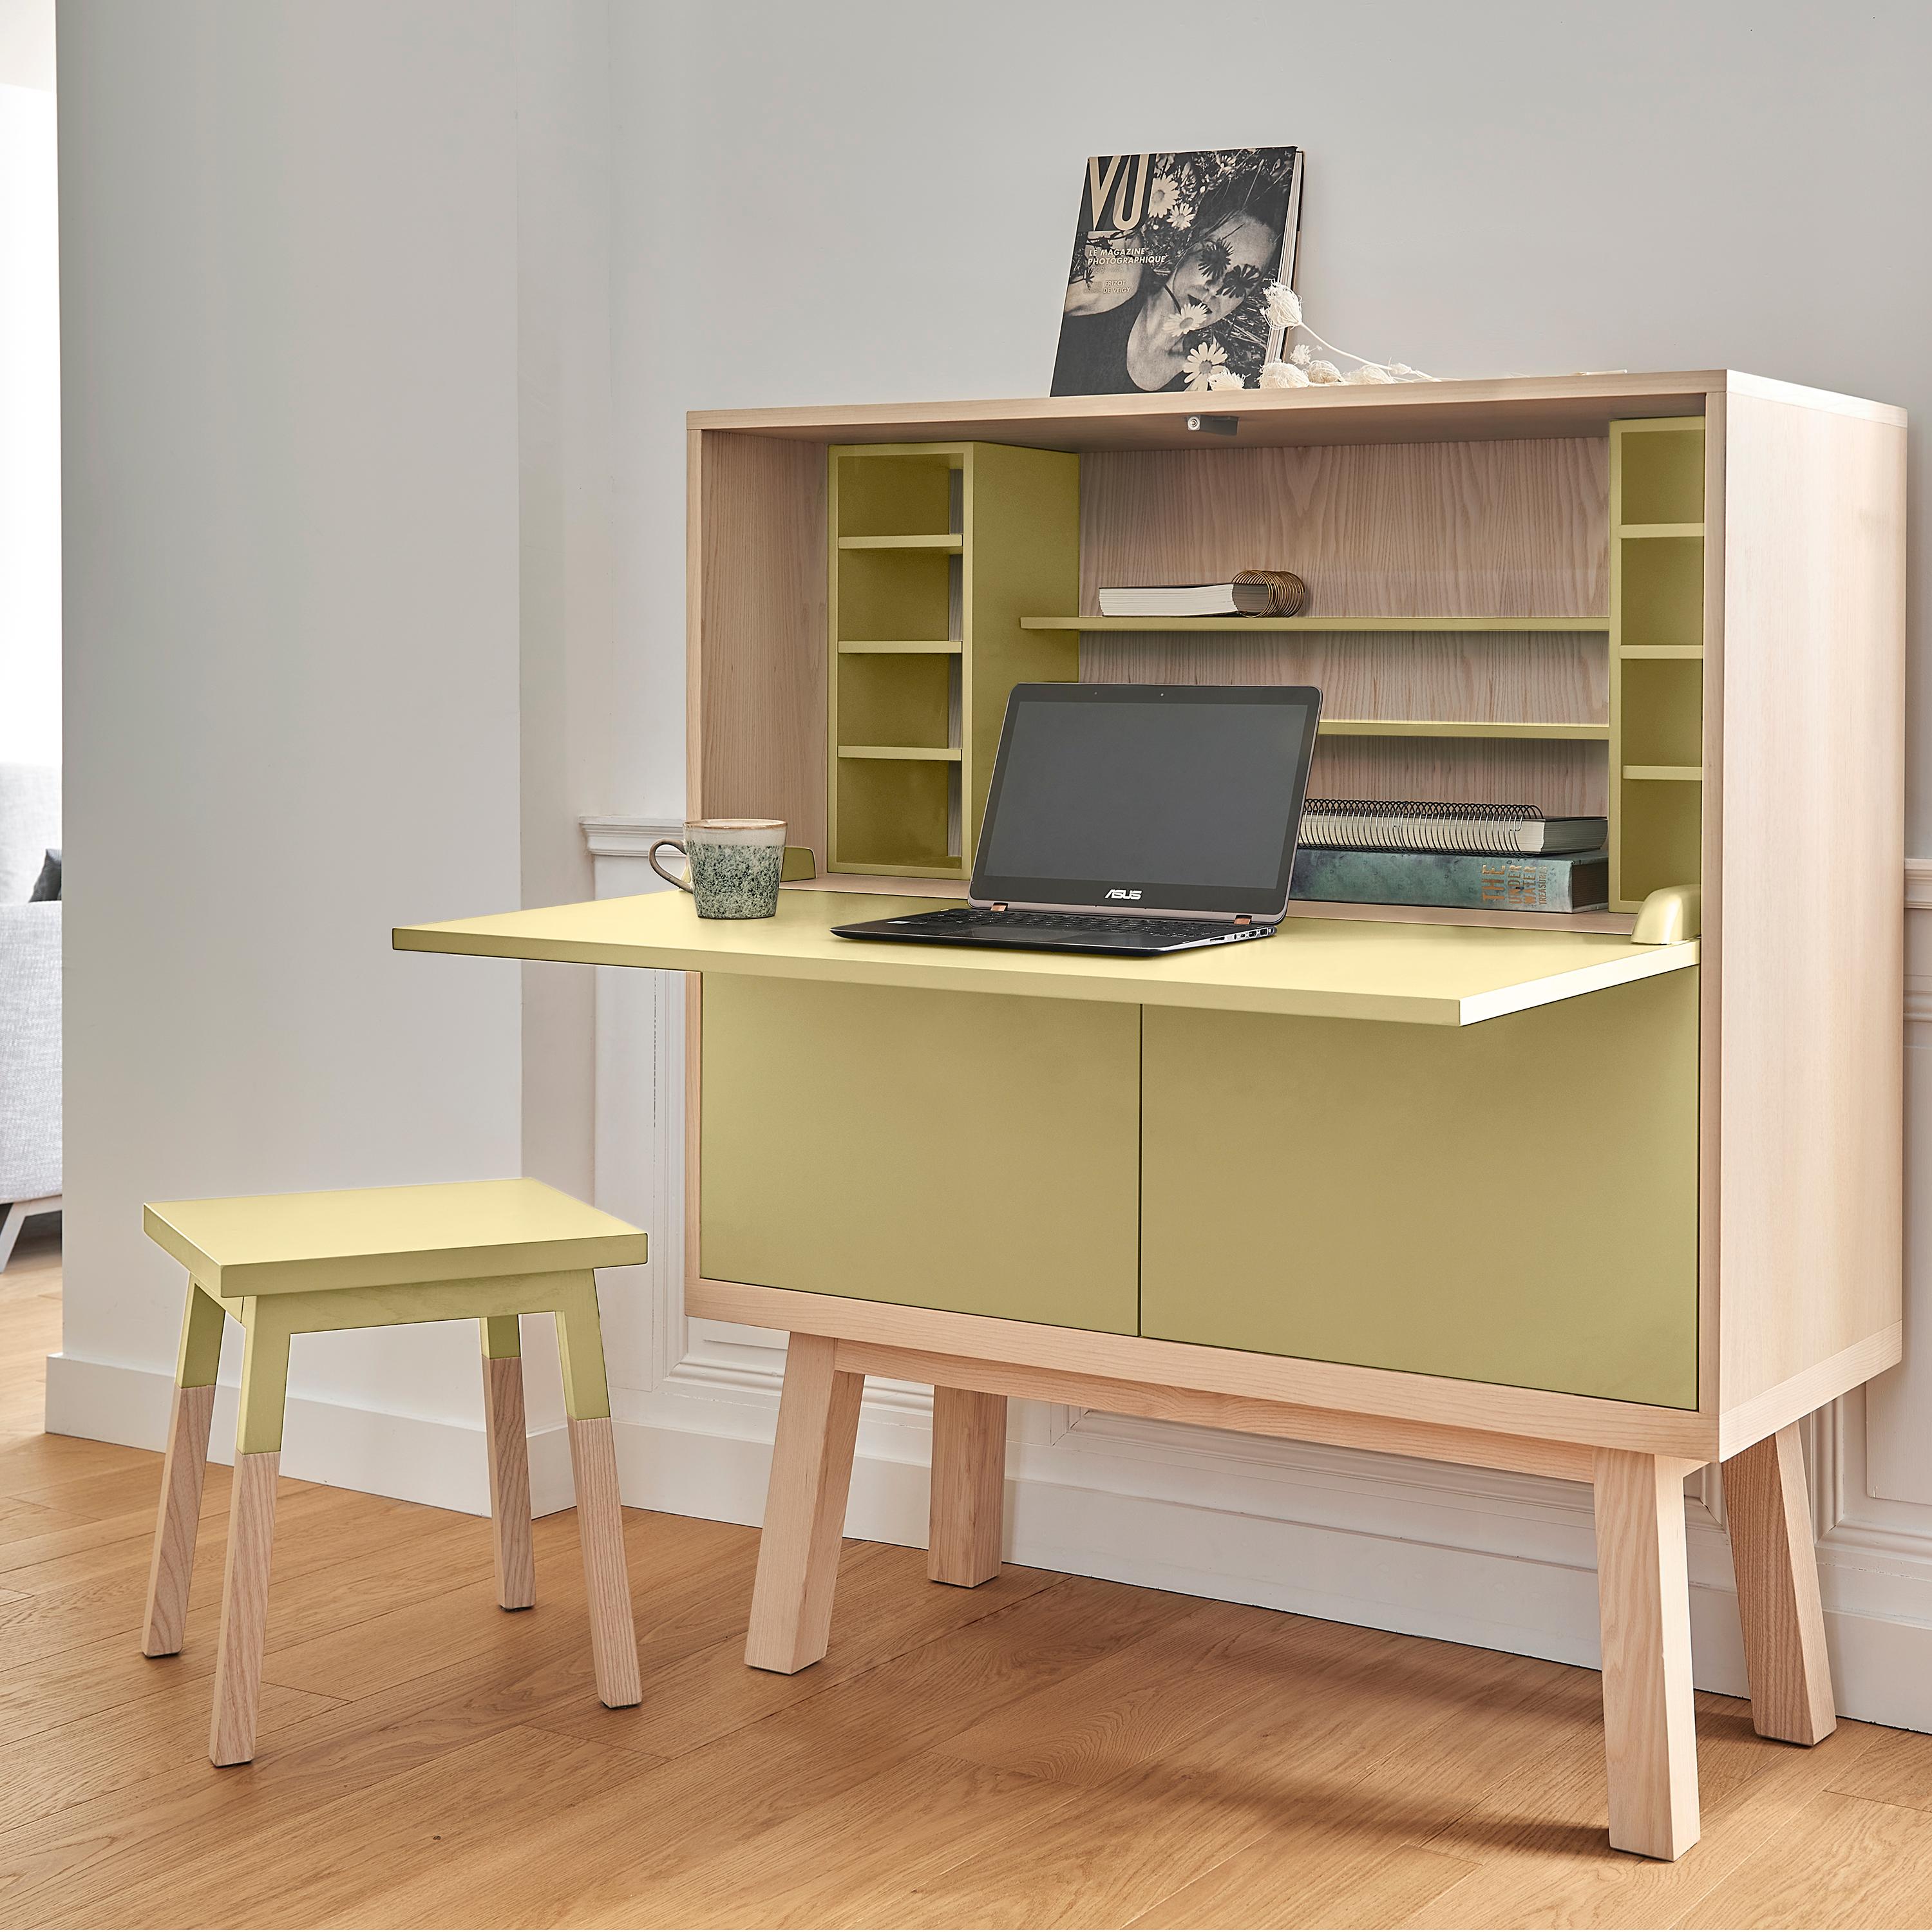 This large secretary desk is designed by the famous parisian Designer Eric Gizard and delivered fully mounted. 

The overall dimensions of the box itself are
Width 120 cm / 47.2''
Height 90 cm / 35.4'' 
Depth 46 cm / 18.11''

Height of the